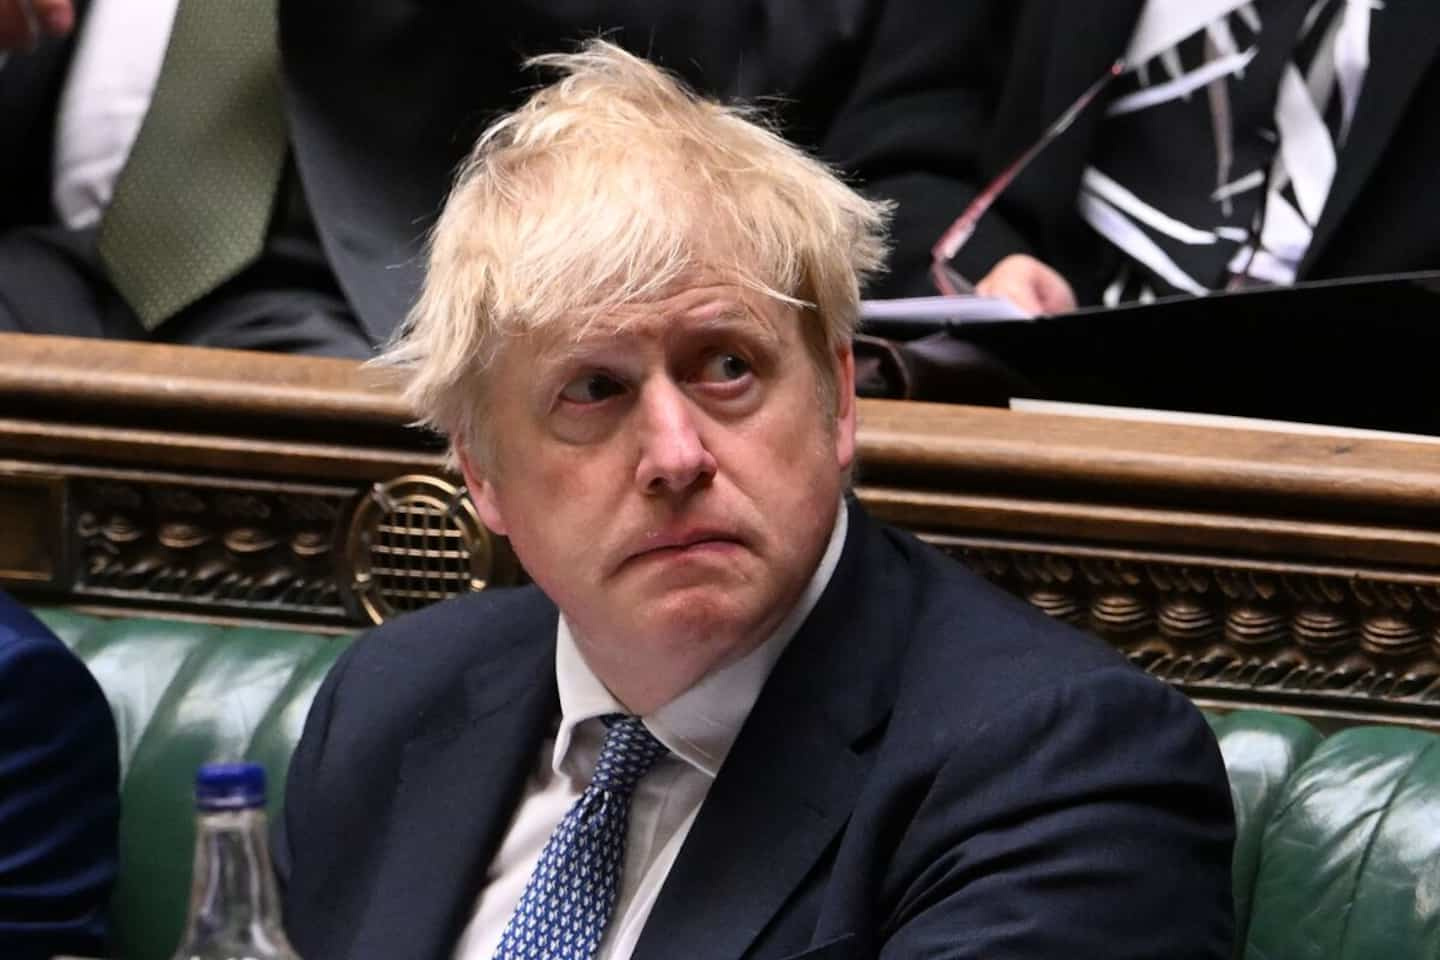 Partygate: towards a motion of no confidence against Boris Johnson, according to a former Conservative leader